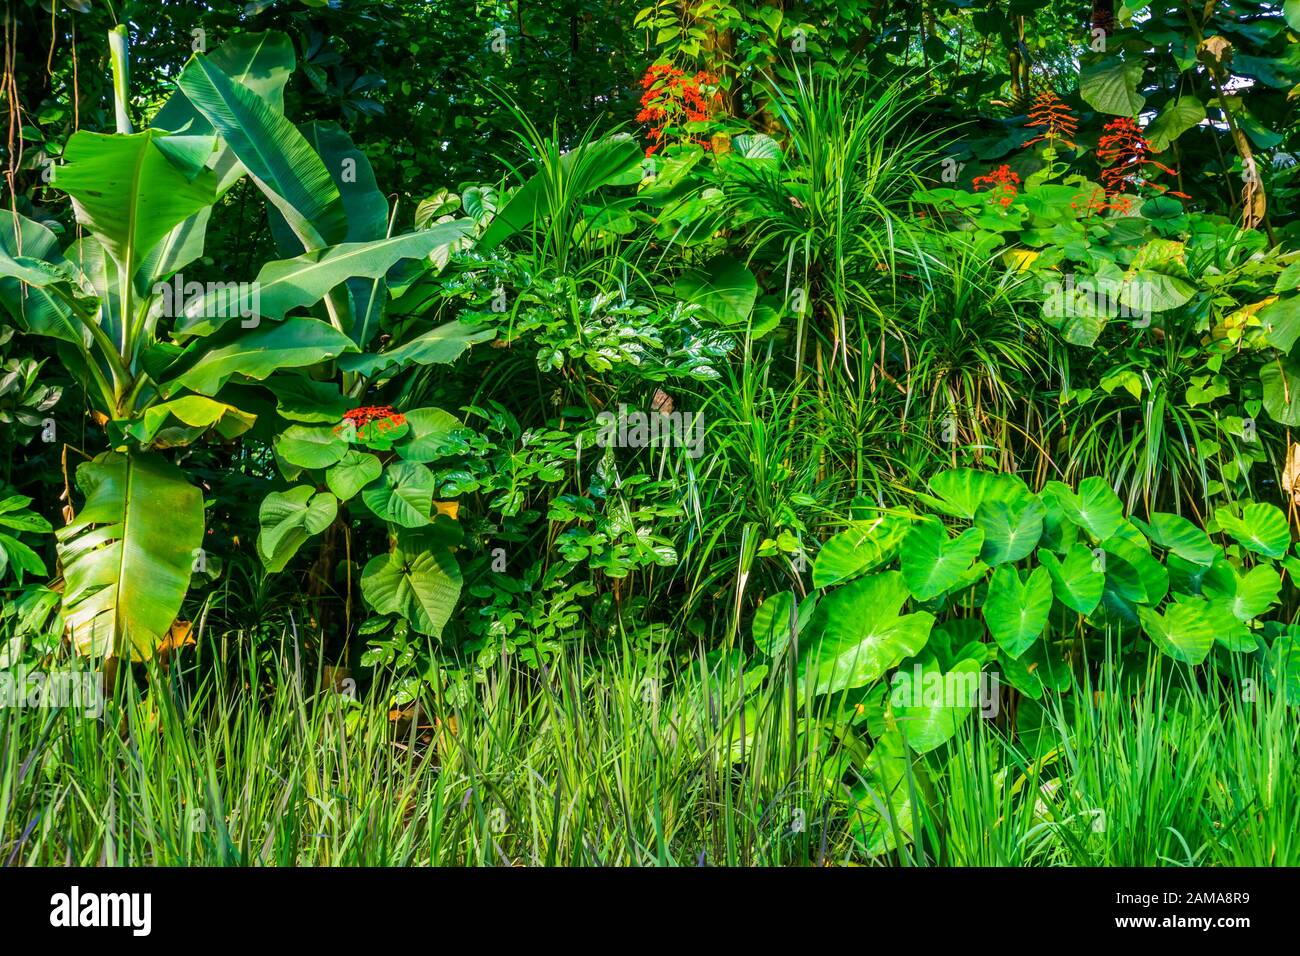 diverse plant species in a tropical garden, wild exotic vegetation, nature background Stock Photo